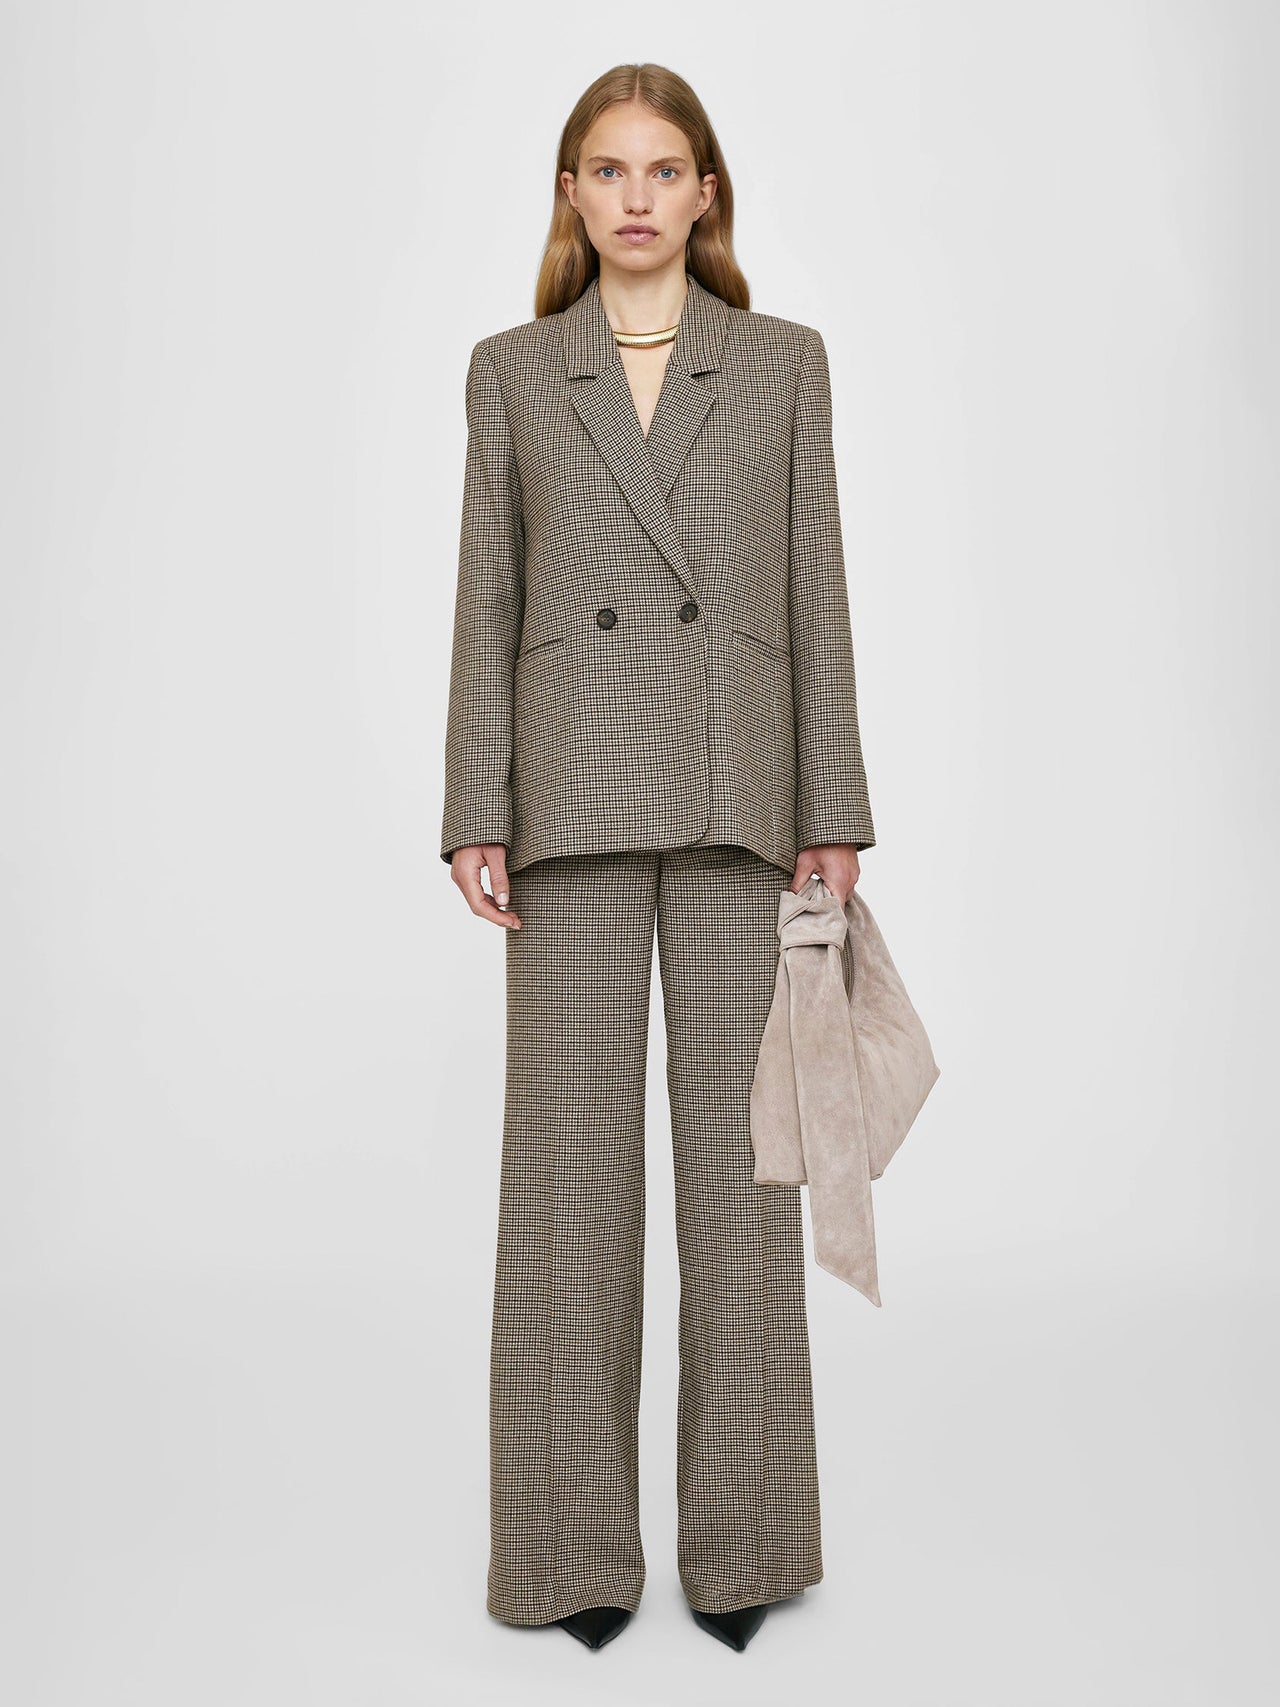 The-Lair-Anine-Bing-Lyra-Trouser-Mini-Houndstooth